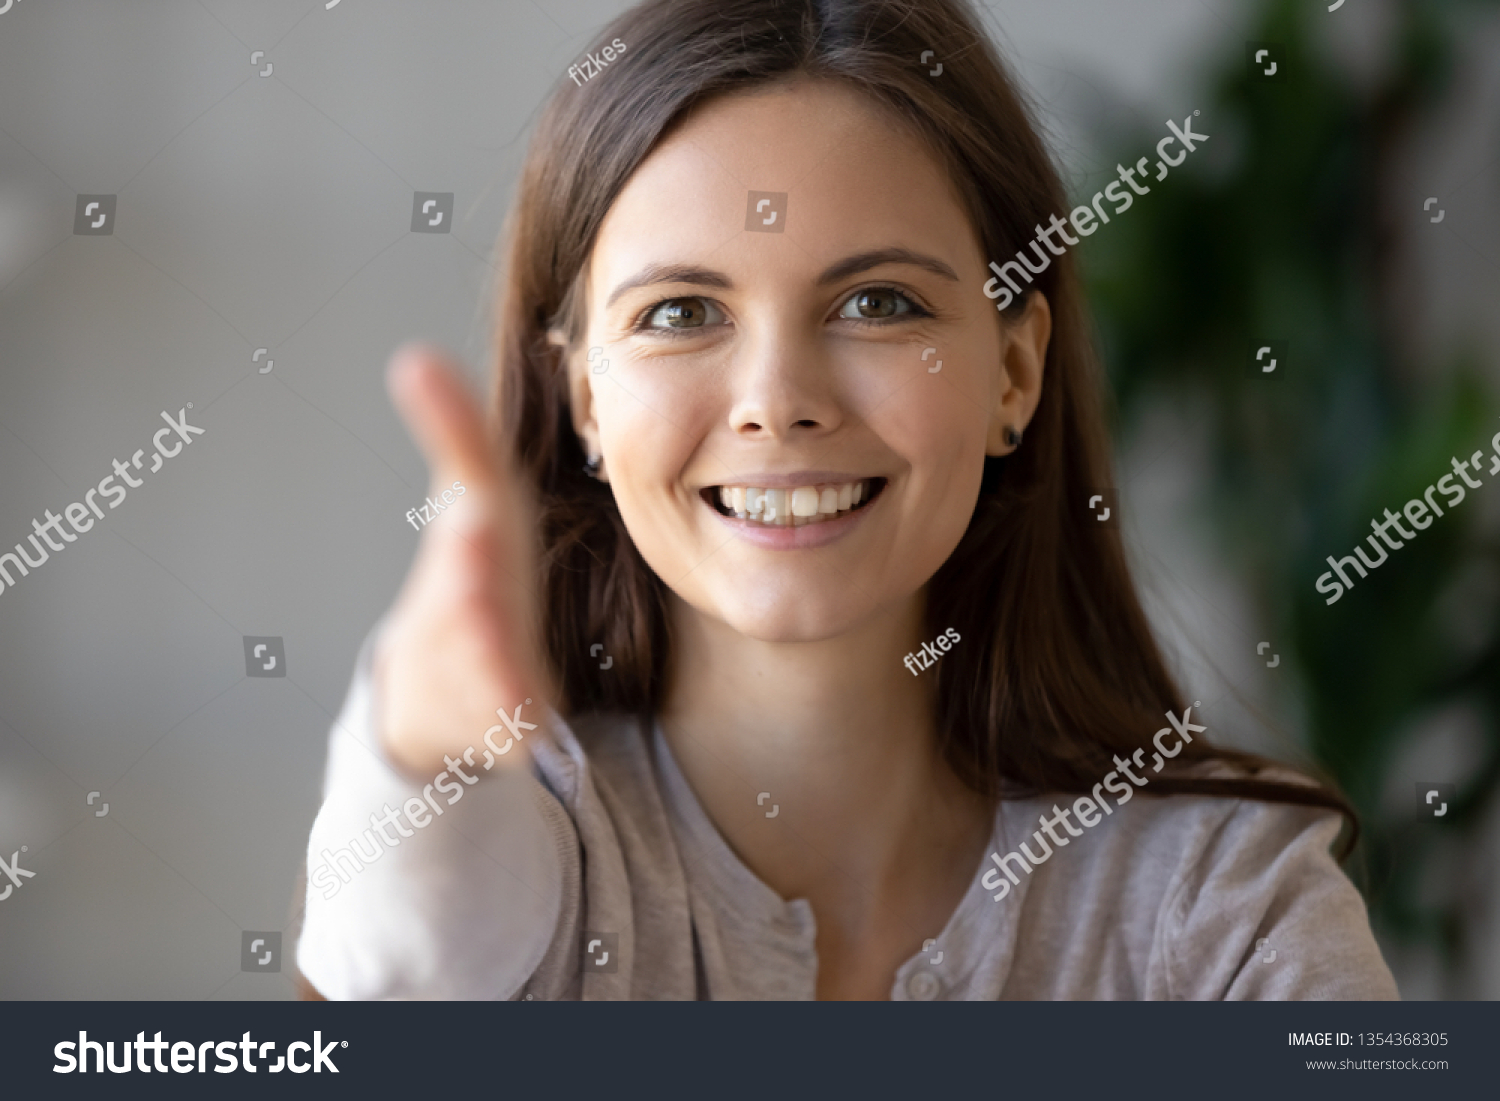 Smiling businesswoman holds out her hand to camera for handshake arm close up, focus on friendly face. Greeting gesture, negotiations, first impressions at acquaintance, hr and congratulations concept #1354368305